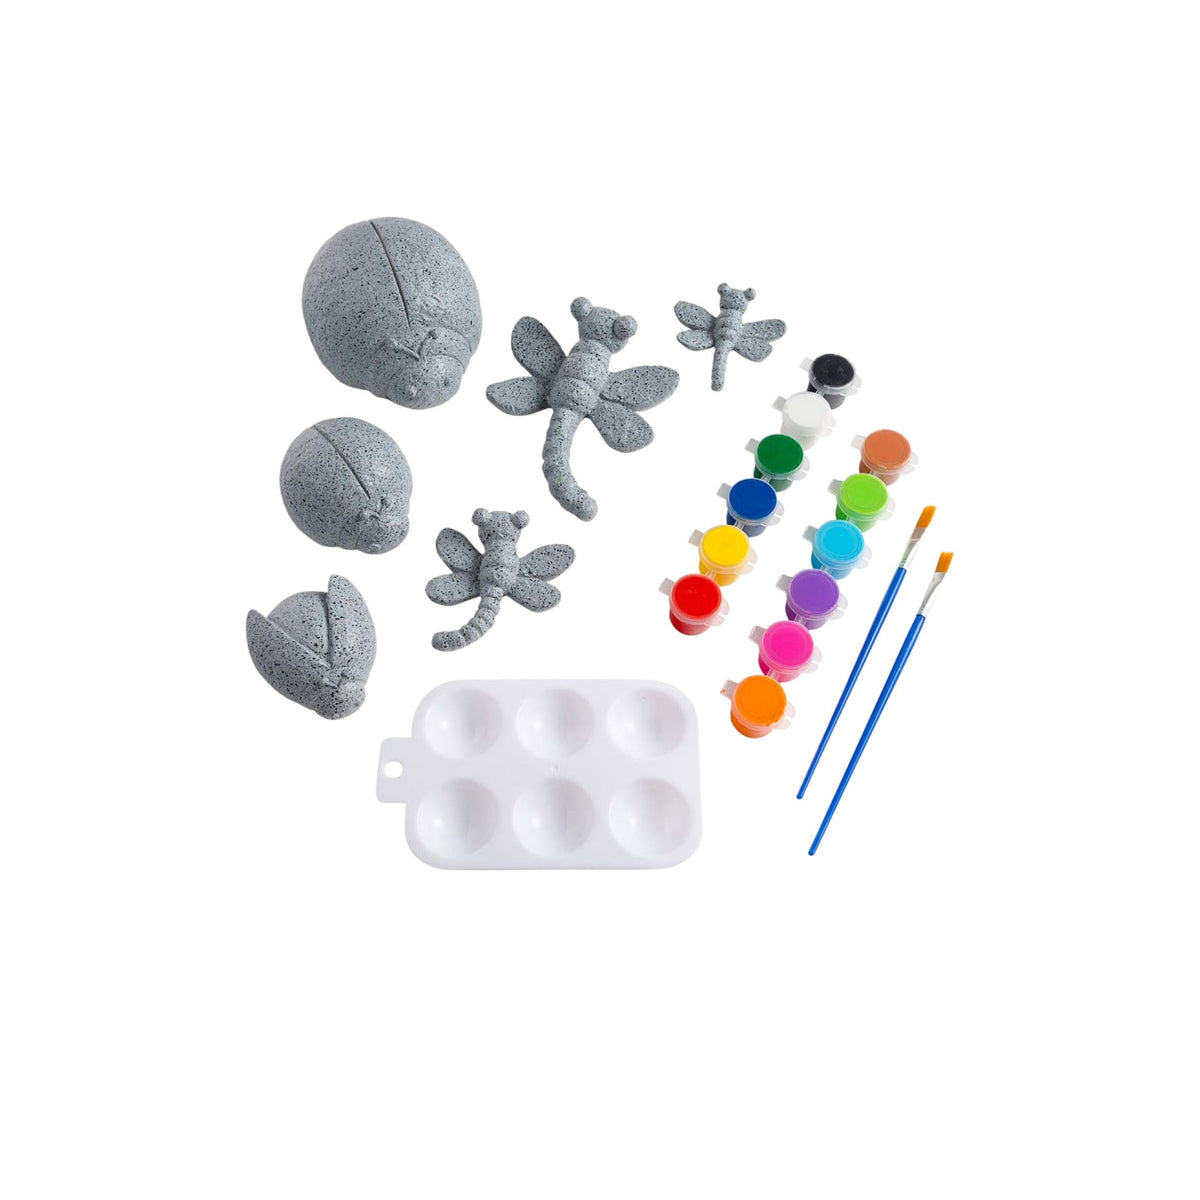 Paint-Your-Own Rock Kits